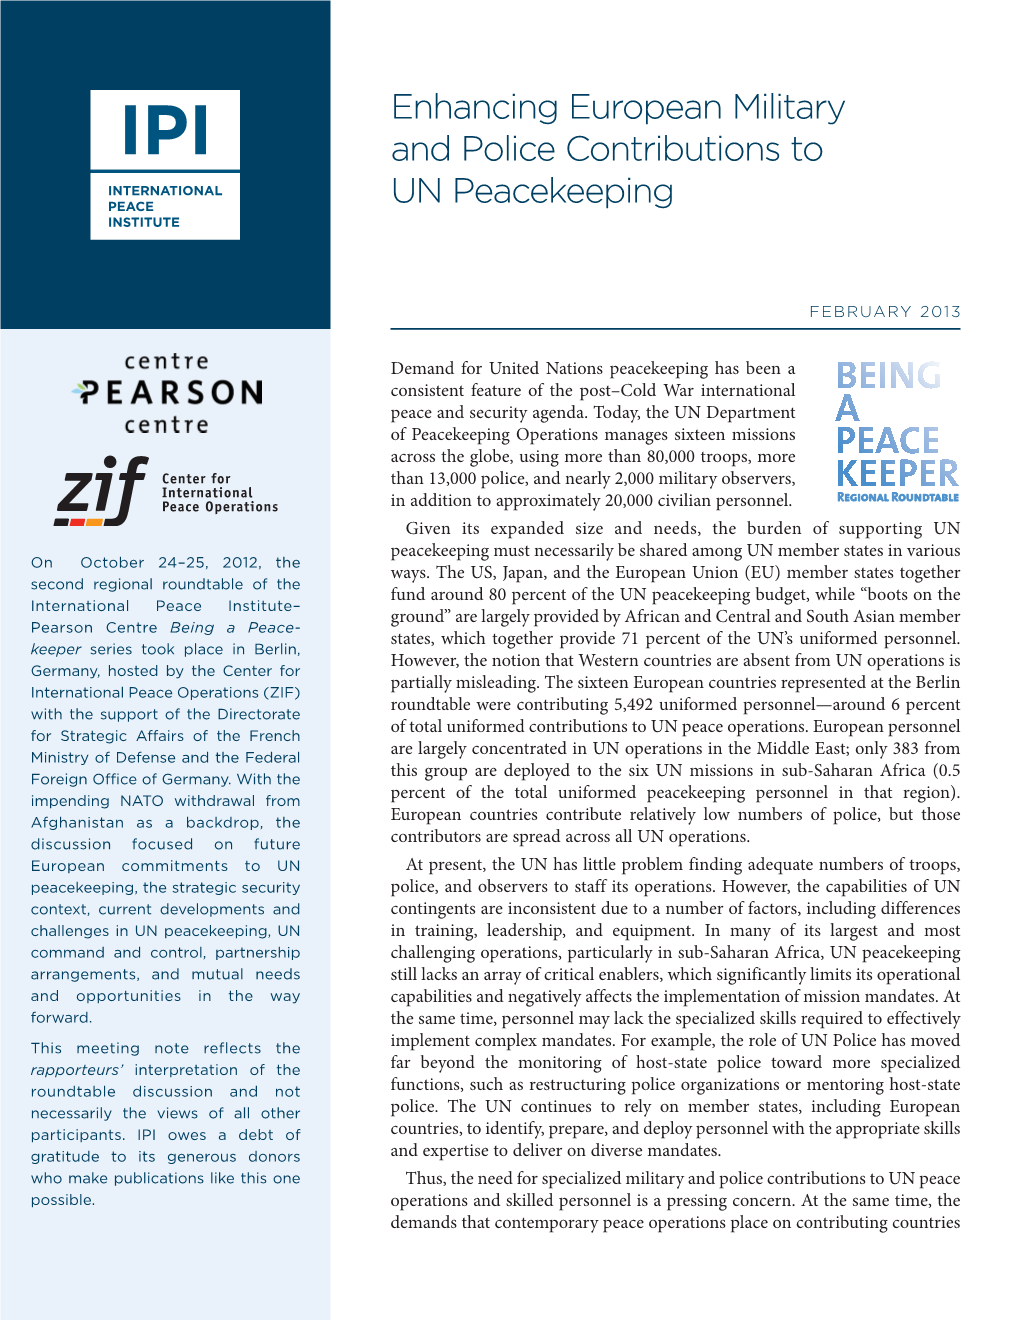 Enhancing European Military and Police Contributions to UN Peacekeeping